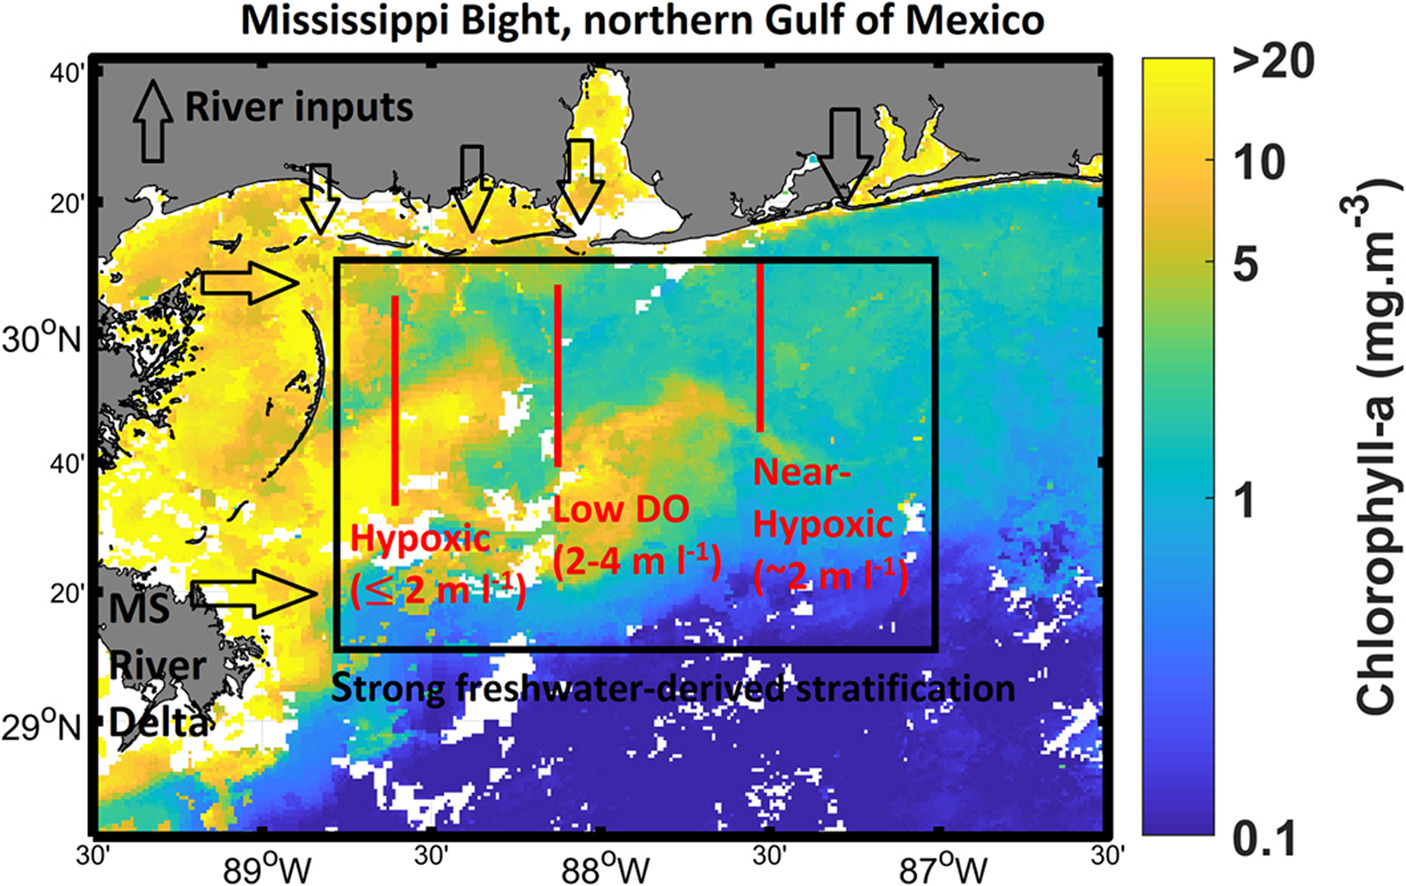 Hypoxia in the Mississippi Bight